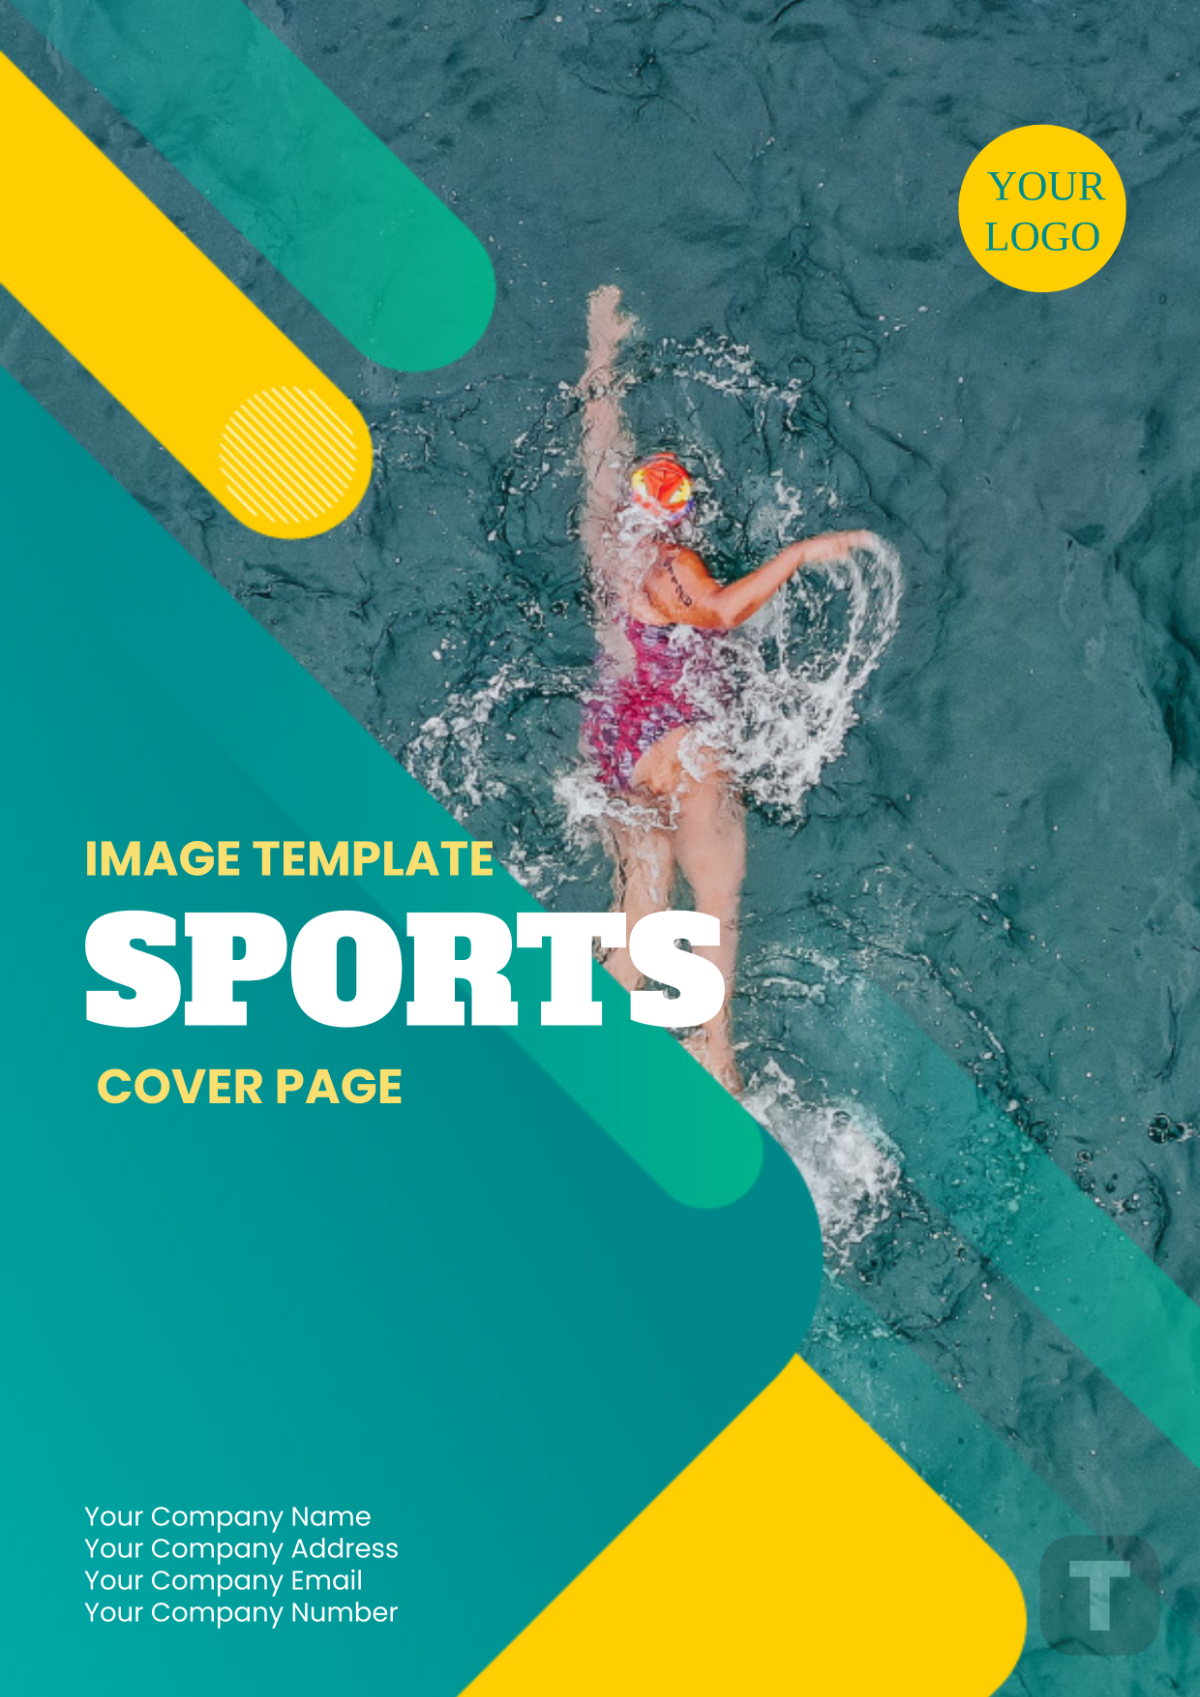 Sports Cover Page Image